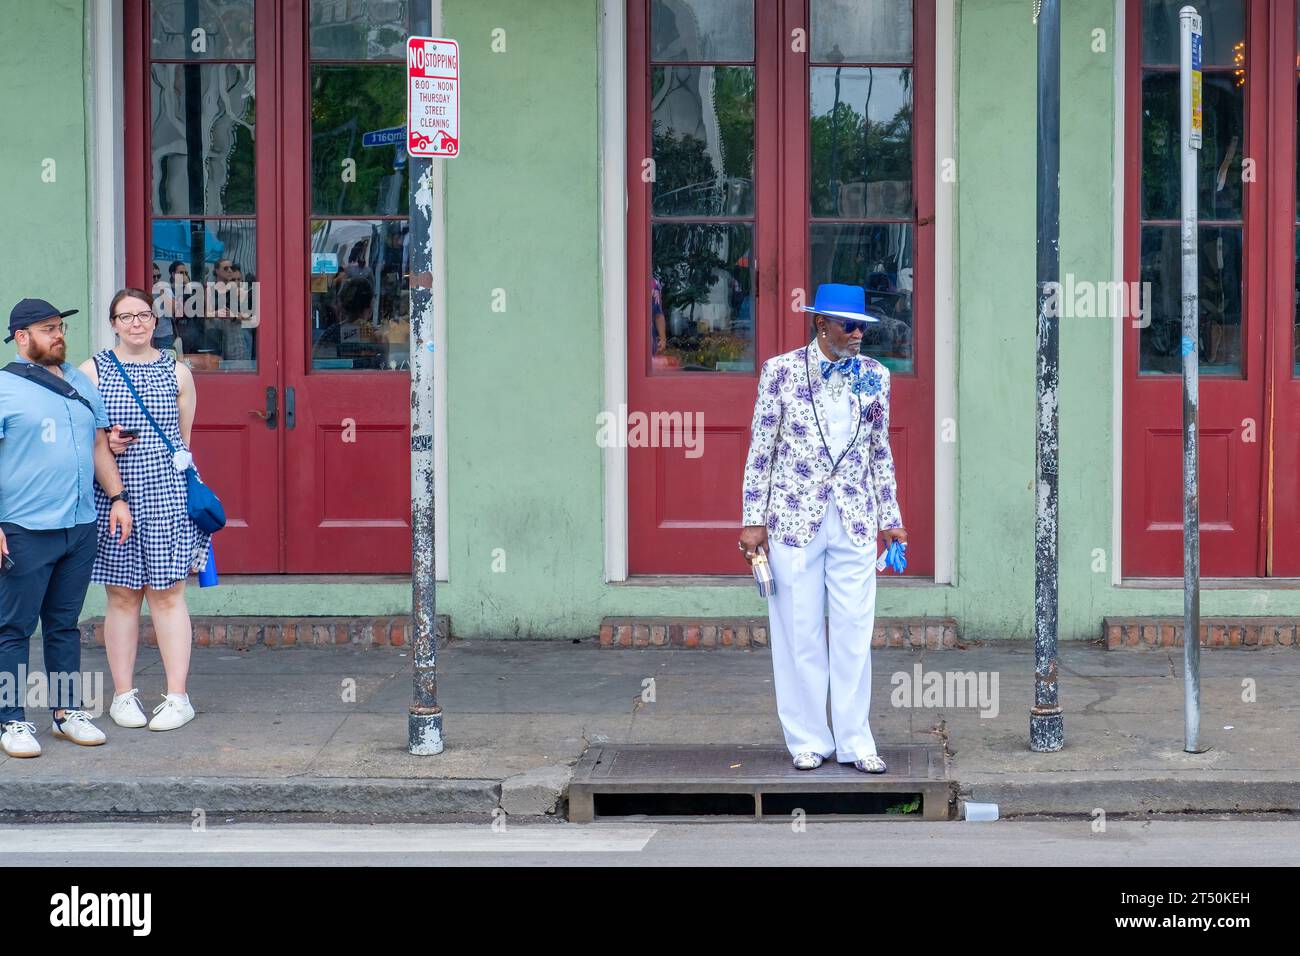 NEW ORLEANS, LA, USA - MARCH 26, 2023: Tourist couple observes a fashionably dressed New Orleanian in the heart of the French  Quarter Stock Photo